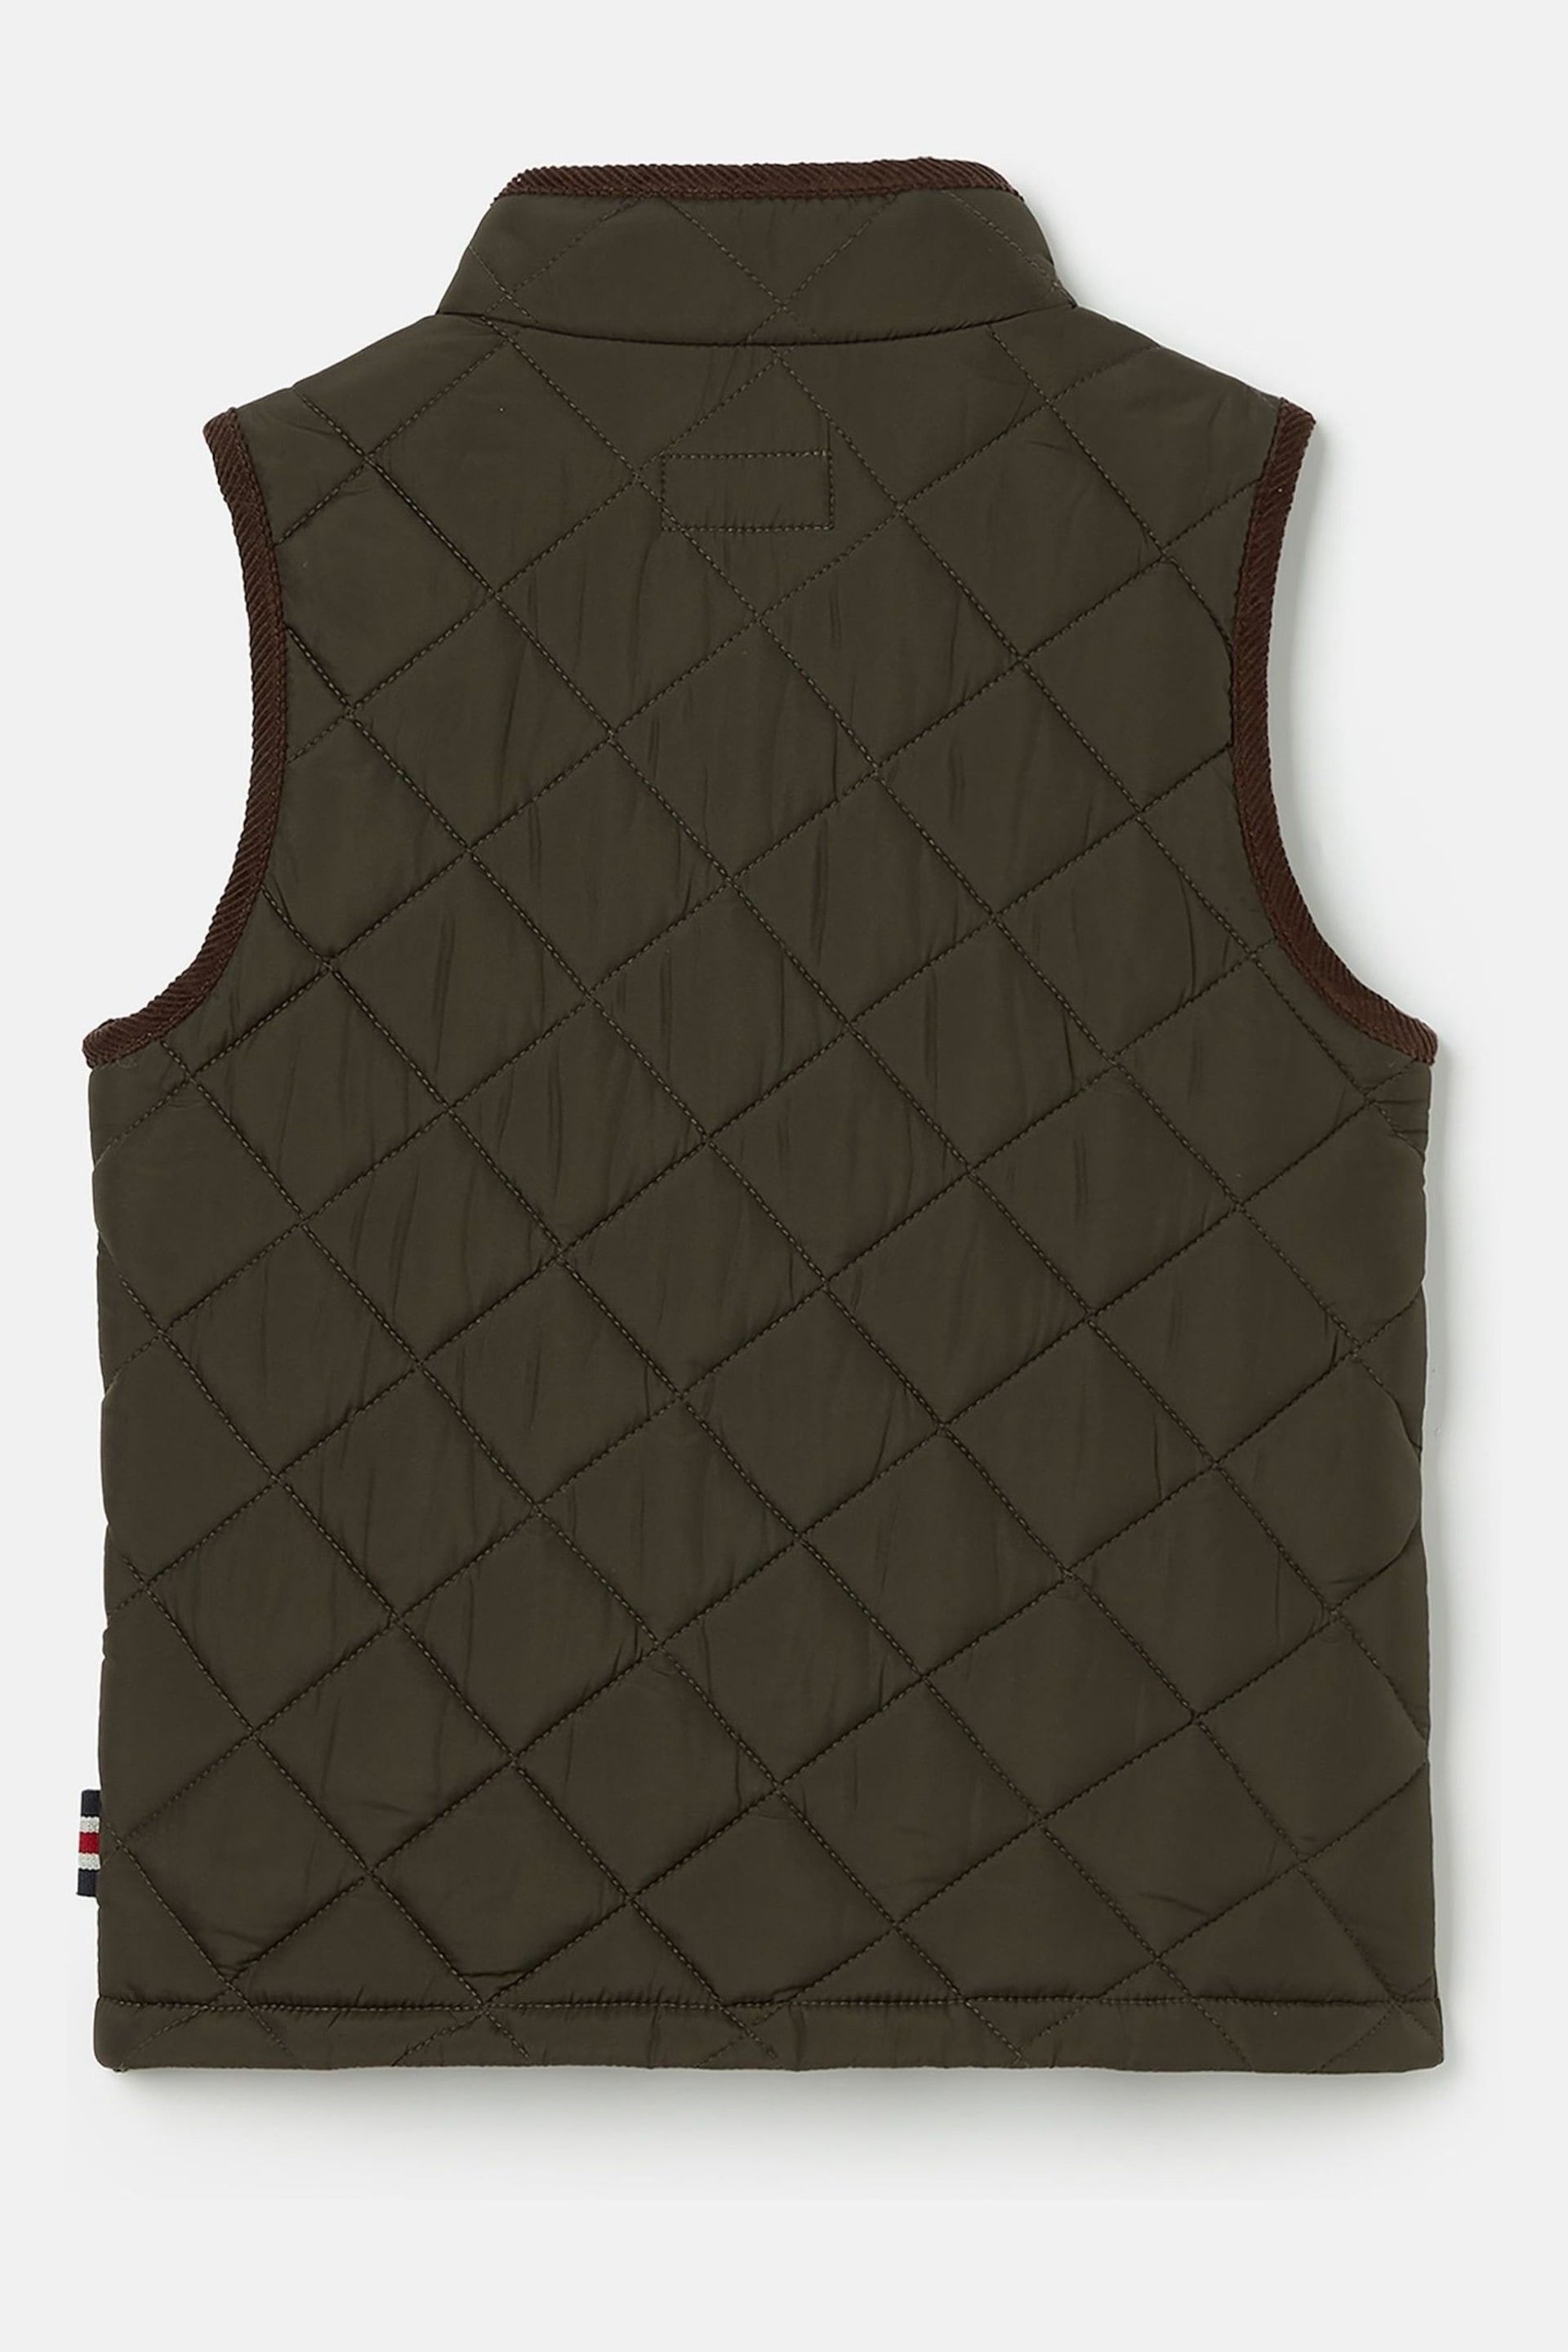 Joules Hugo Green Quilted Gilet - Image 2 of 6